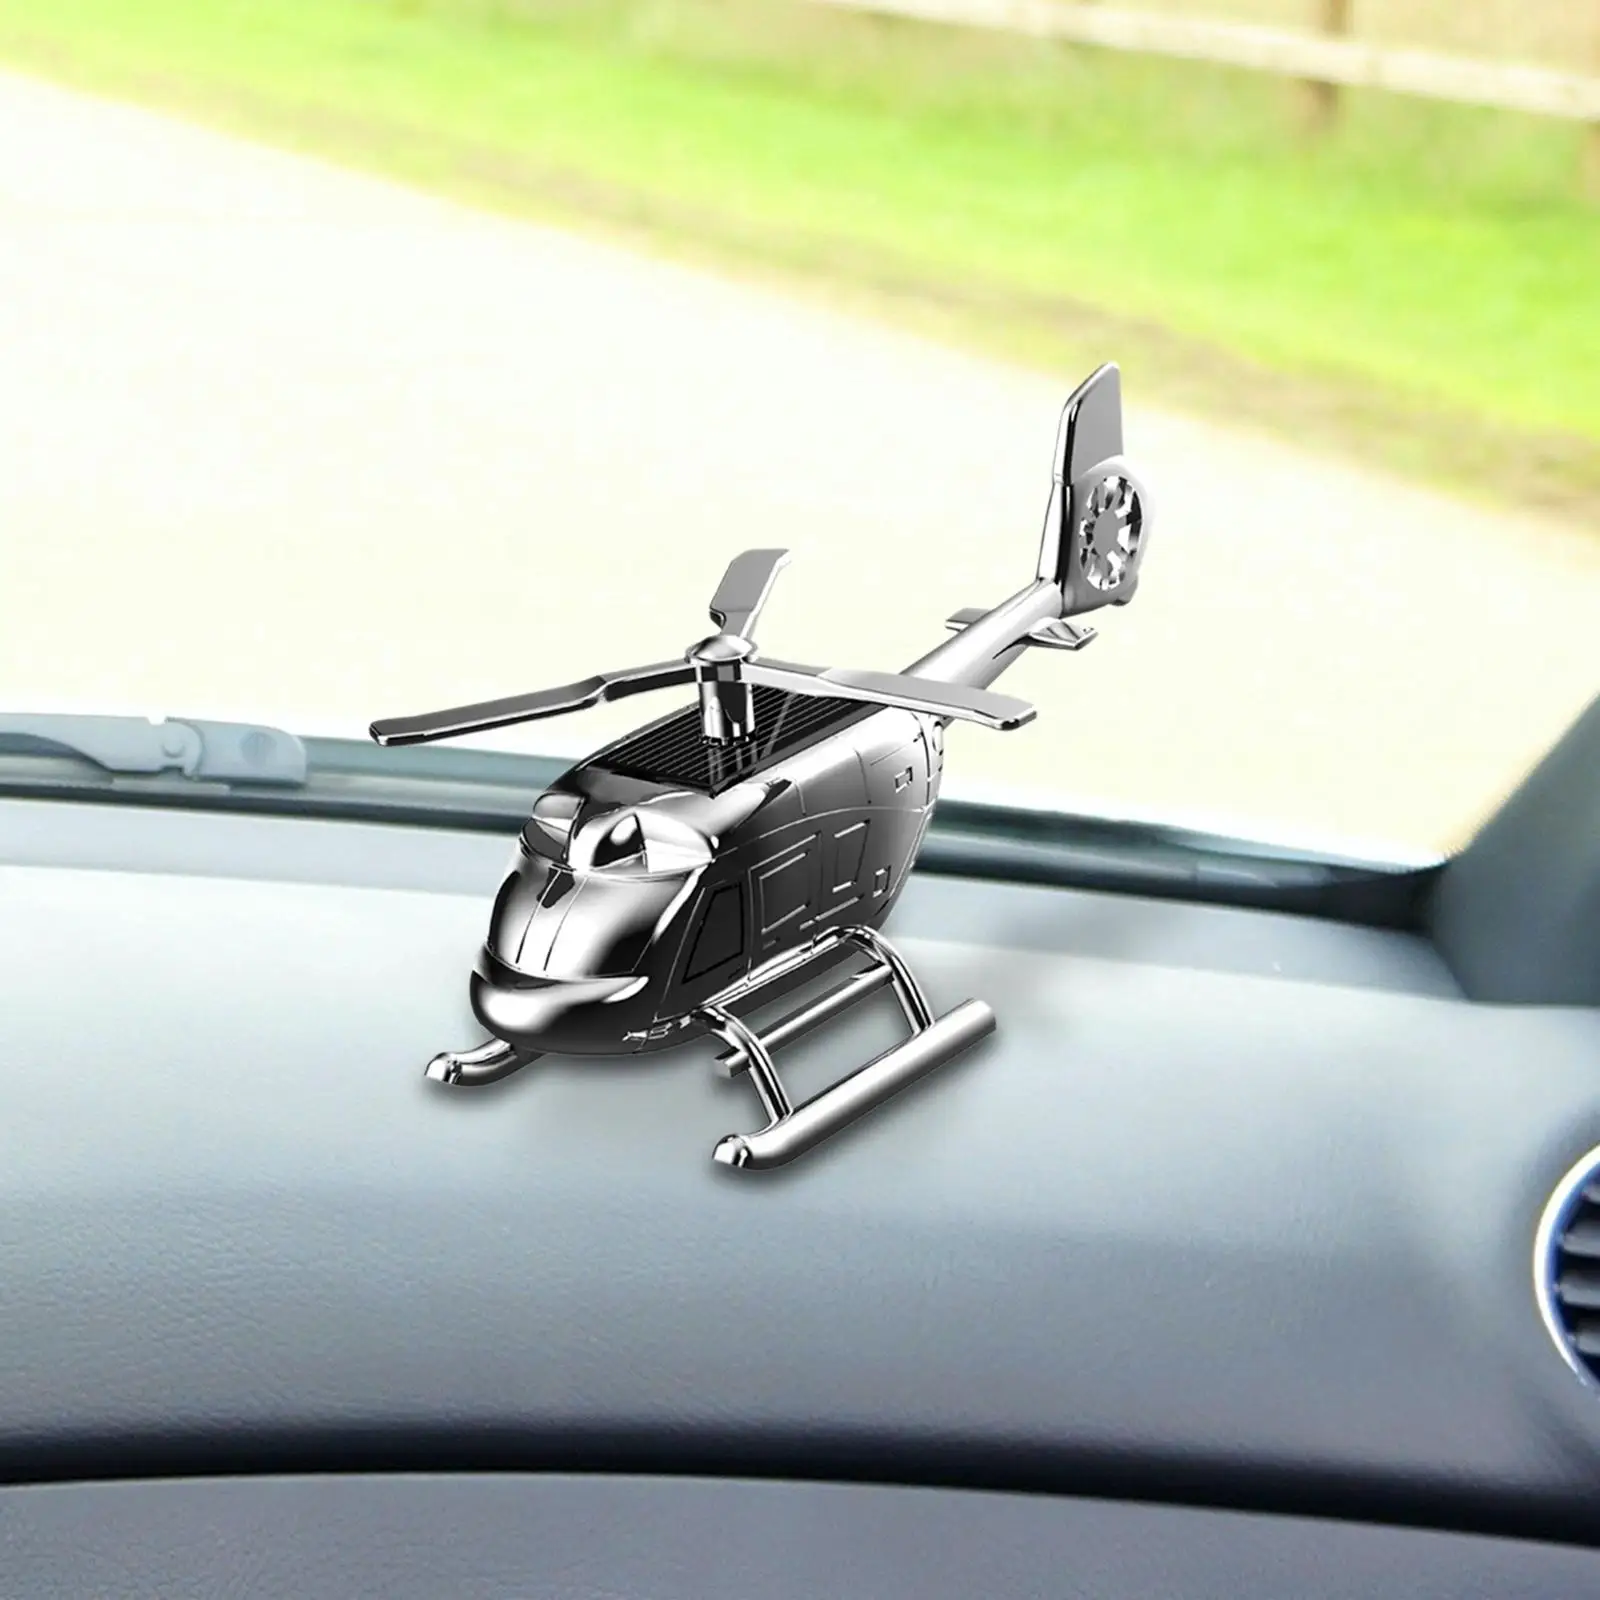 Solar Rotating Car Air Freshener Ornament Birthday Gifts Aircraft for Vehicle Home